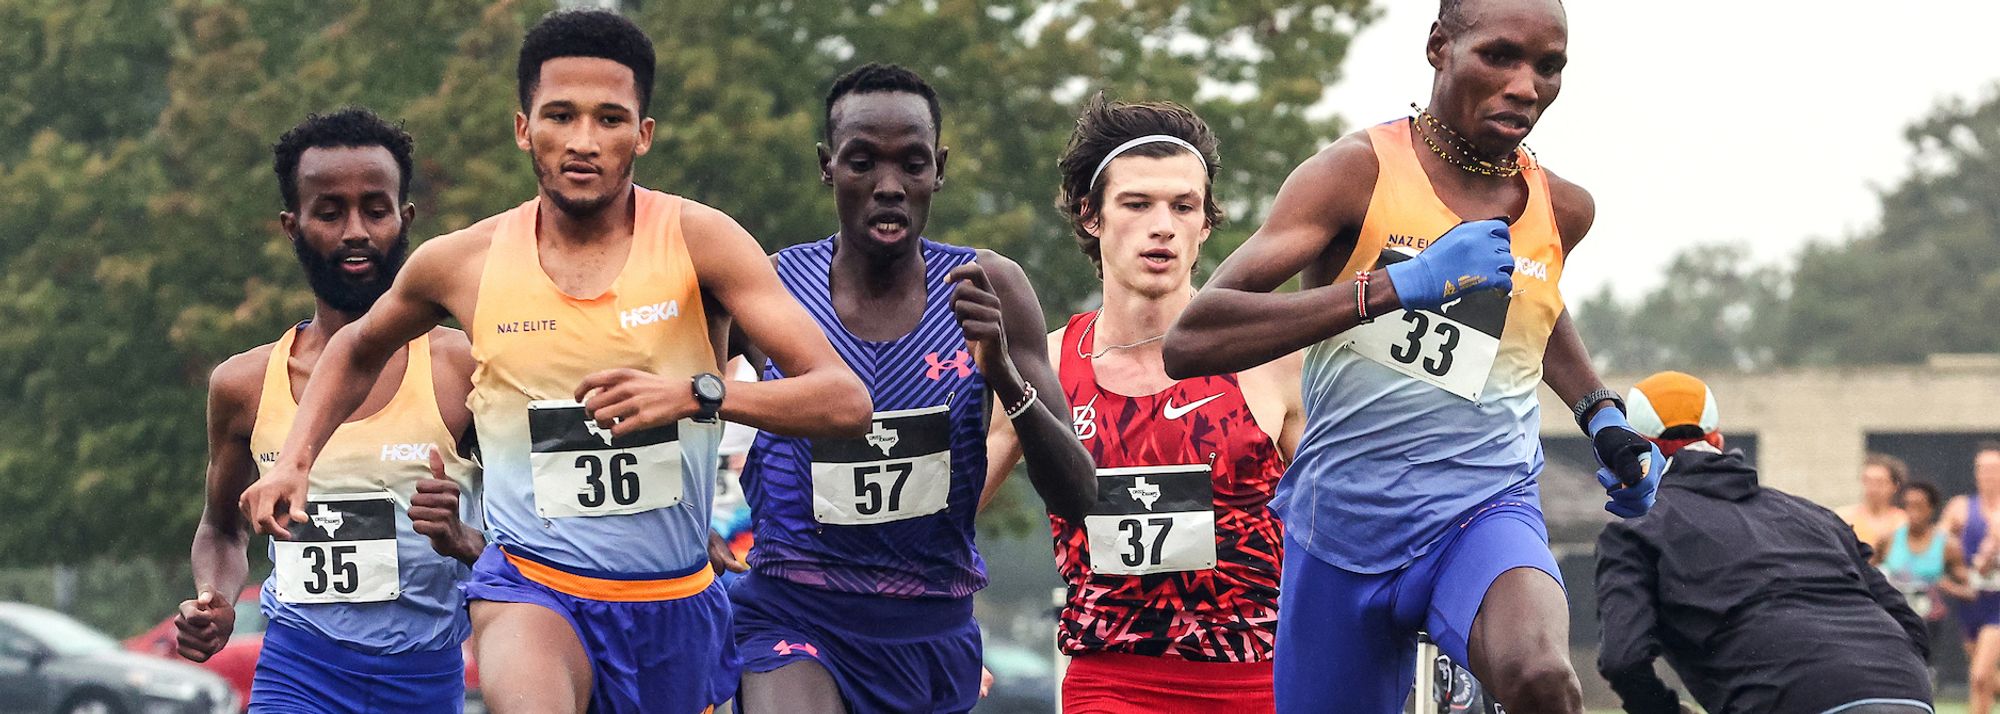 South Africa’s Adriaan Wildschutt and USA’s Katie Wasserman were victorious at this season’s seventh World Athletics Cross Country Tour Gold meeting